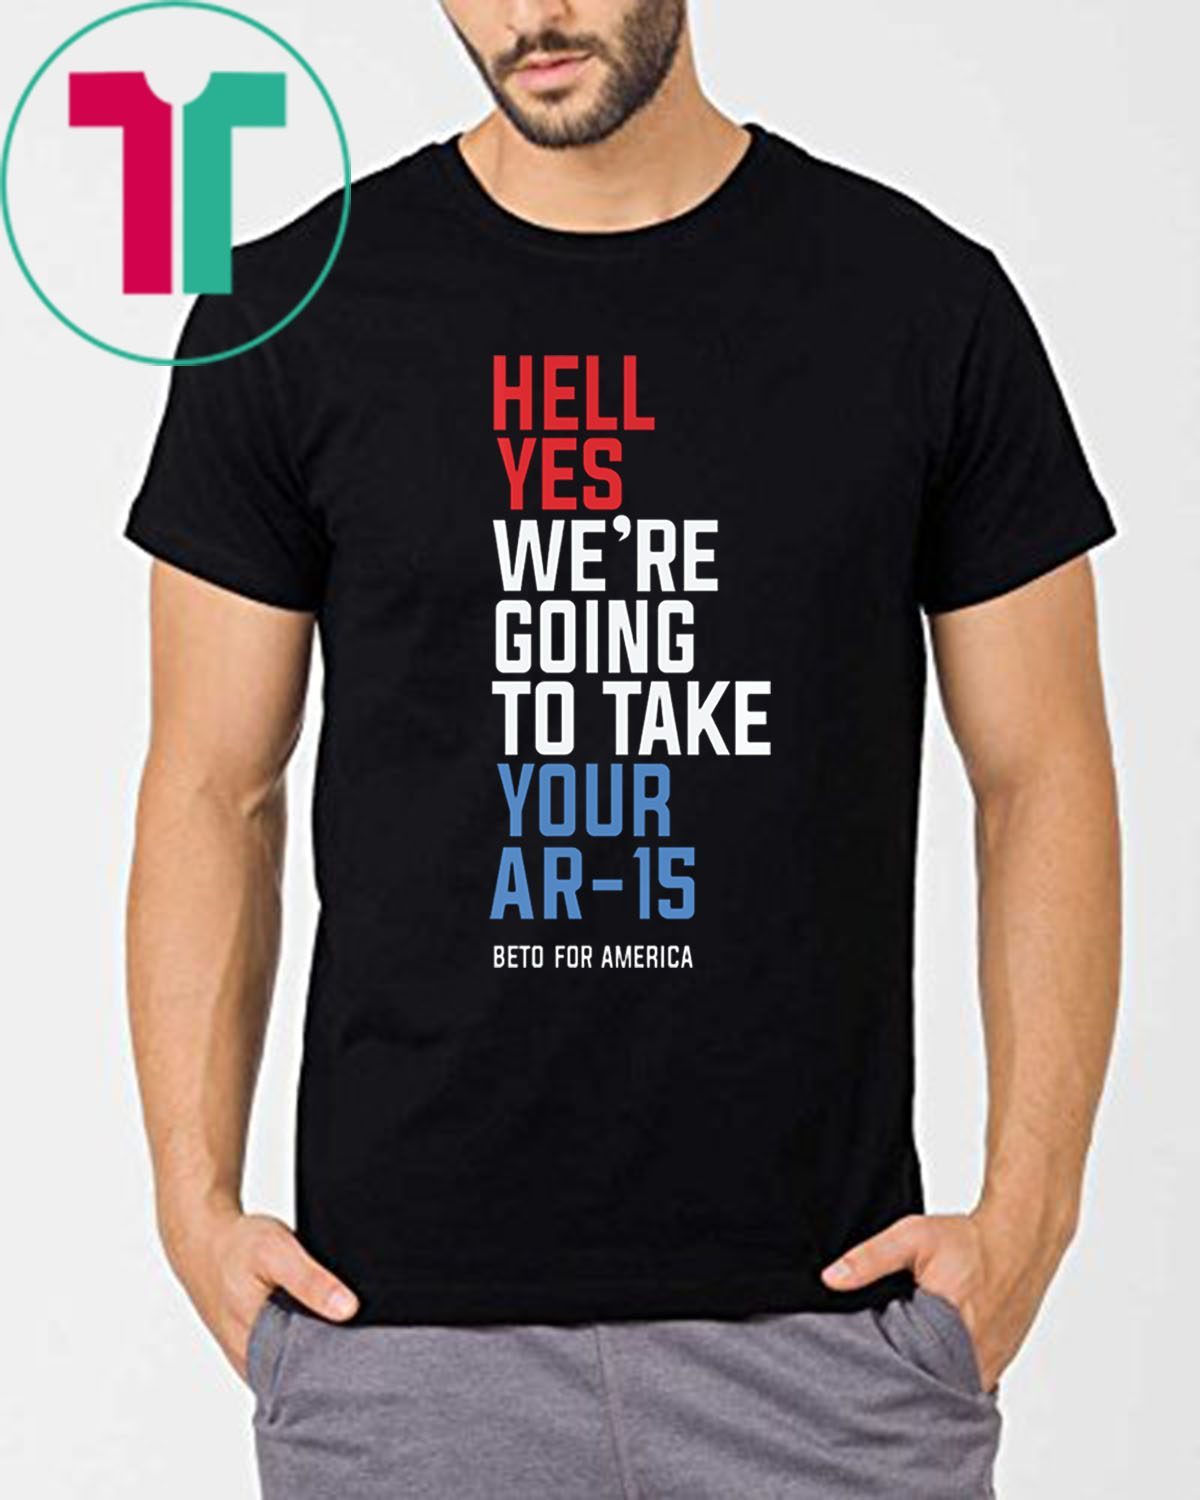 Hell Yes We’re Going To Take Your Ar-15 T-Shirt Beto 2020 ...